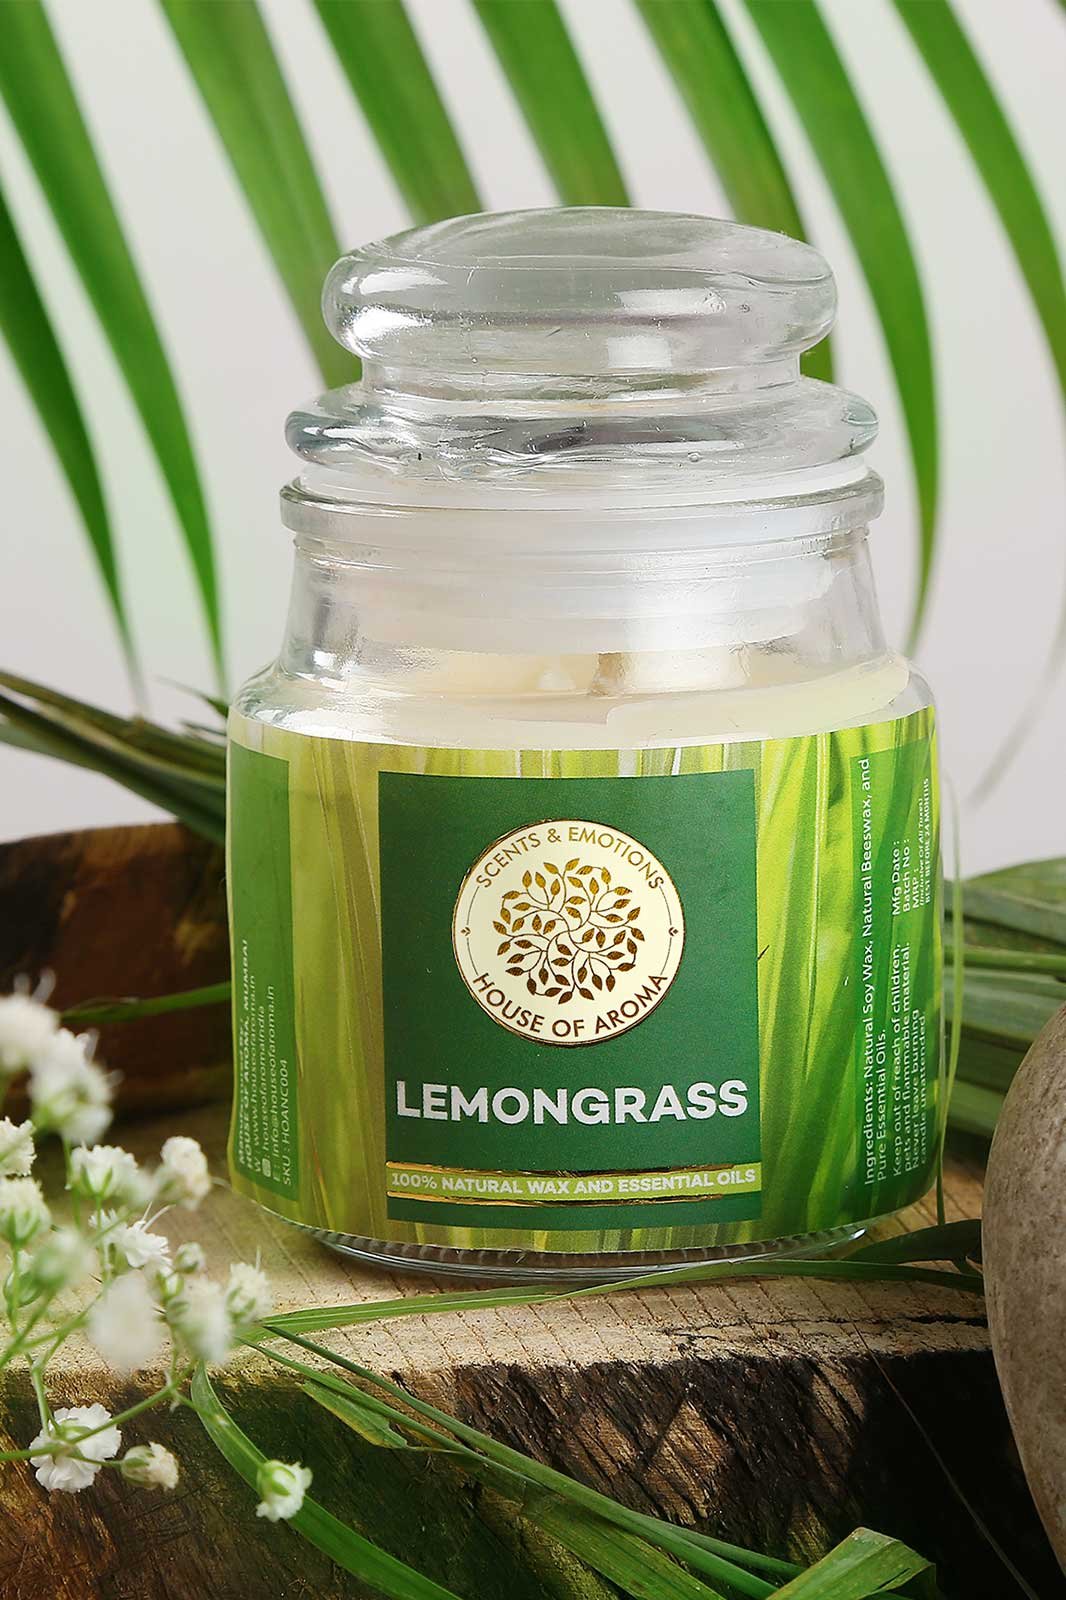 lemongrass natural scented candle, best lemongrass scented candle, lemongrass scent candle, lemongrass candle scent, lemongrass candles, lemongrass candle fragrance, lemongrass wax candles, lemongrass candle scent, lemongrass beeswax candle, lemongrass candle woodwick, lemongrass scented candle benefits, lemongrass pillar candle, lemongrass fragrance scent, lemongrass candle blend, lemongrass scent benefits, lemongrass home scent, lemongrass soy candles, best lemongrass candles, natural scented candles, natural scents for candles, organic scented candles India, luxury scented candles India, natural soy candle wax, natural fragrance for candles, natural soy candle company, best scented candles India, scented candles for bedroom, organic, scented candles India, most fragrant scented candles, glass jar candles, bell jar candles, bell jar candle, bell jar candle India, essential oil wax candle, soy wax essential oil candles, essential oil wax candles, natural scented candle brands, scented candles best brand, candle brands in India, organic scented candles India, best scented candle brands in India, top candle brands in India, best candle brands in the world, bedroom candles, room fragrance candles, best bedroom candles, best room scented candles, room freshener candles, beeswax candles, beeswax candles scented, beeswax candles jar